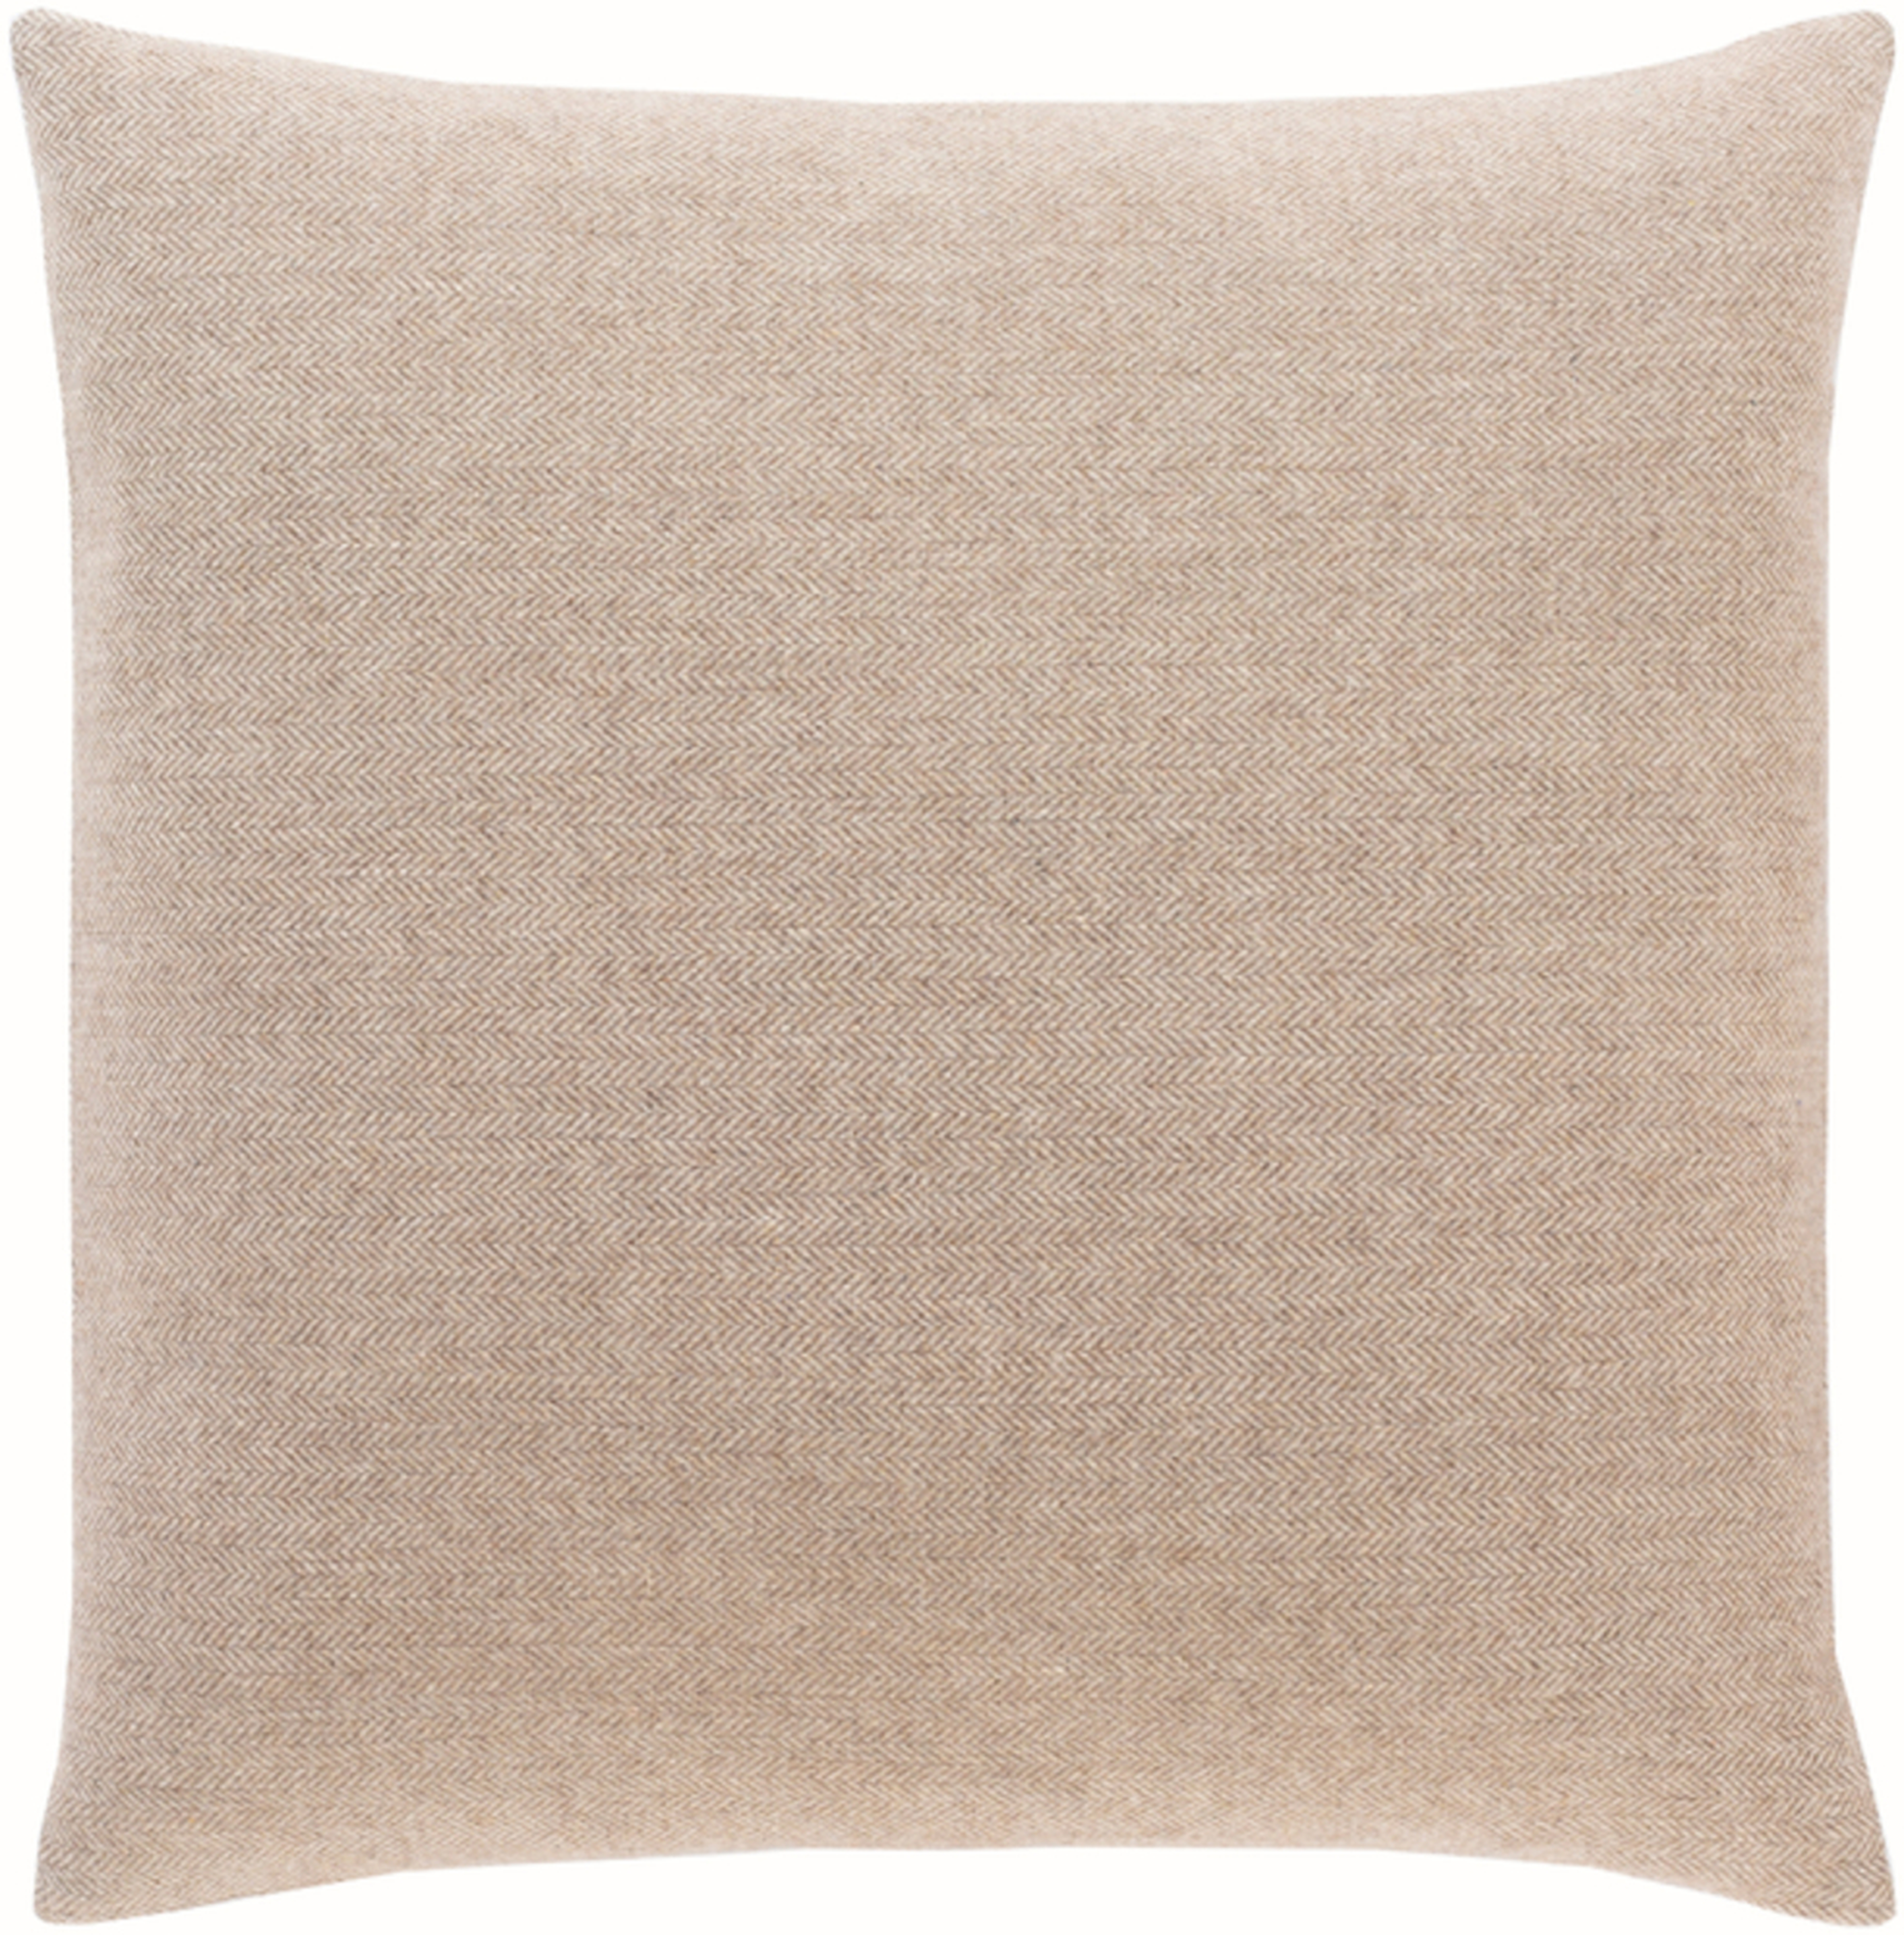 Wells Pillow Cover, 20" x 20", Taupe - Cove Goods